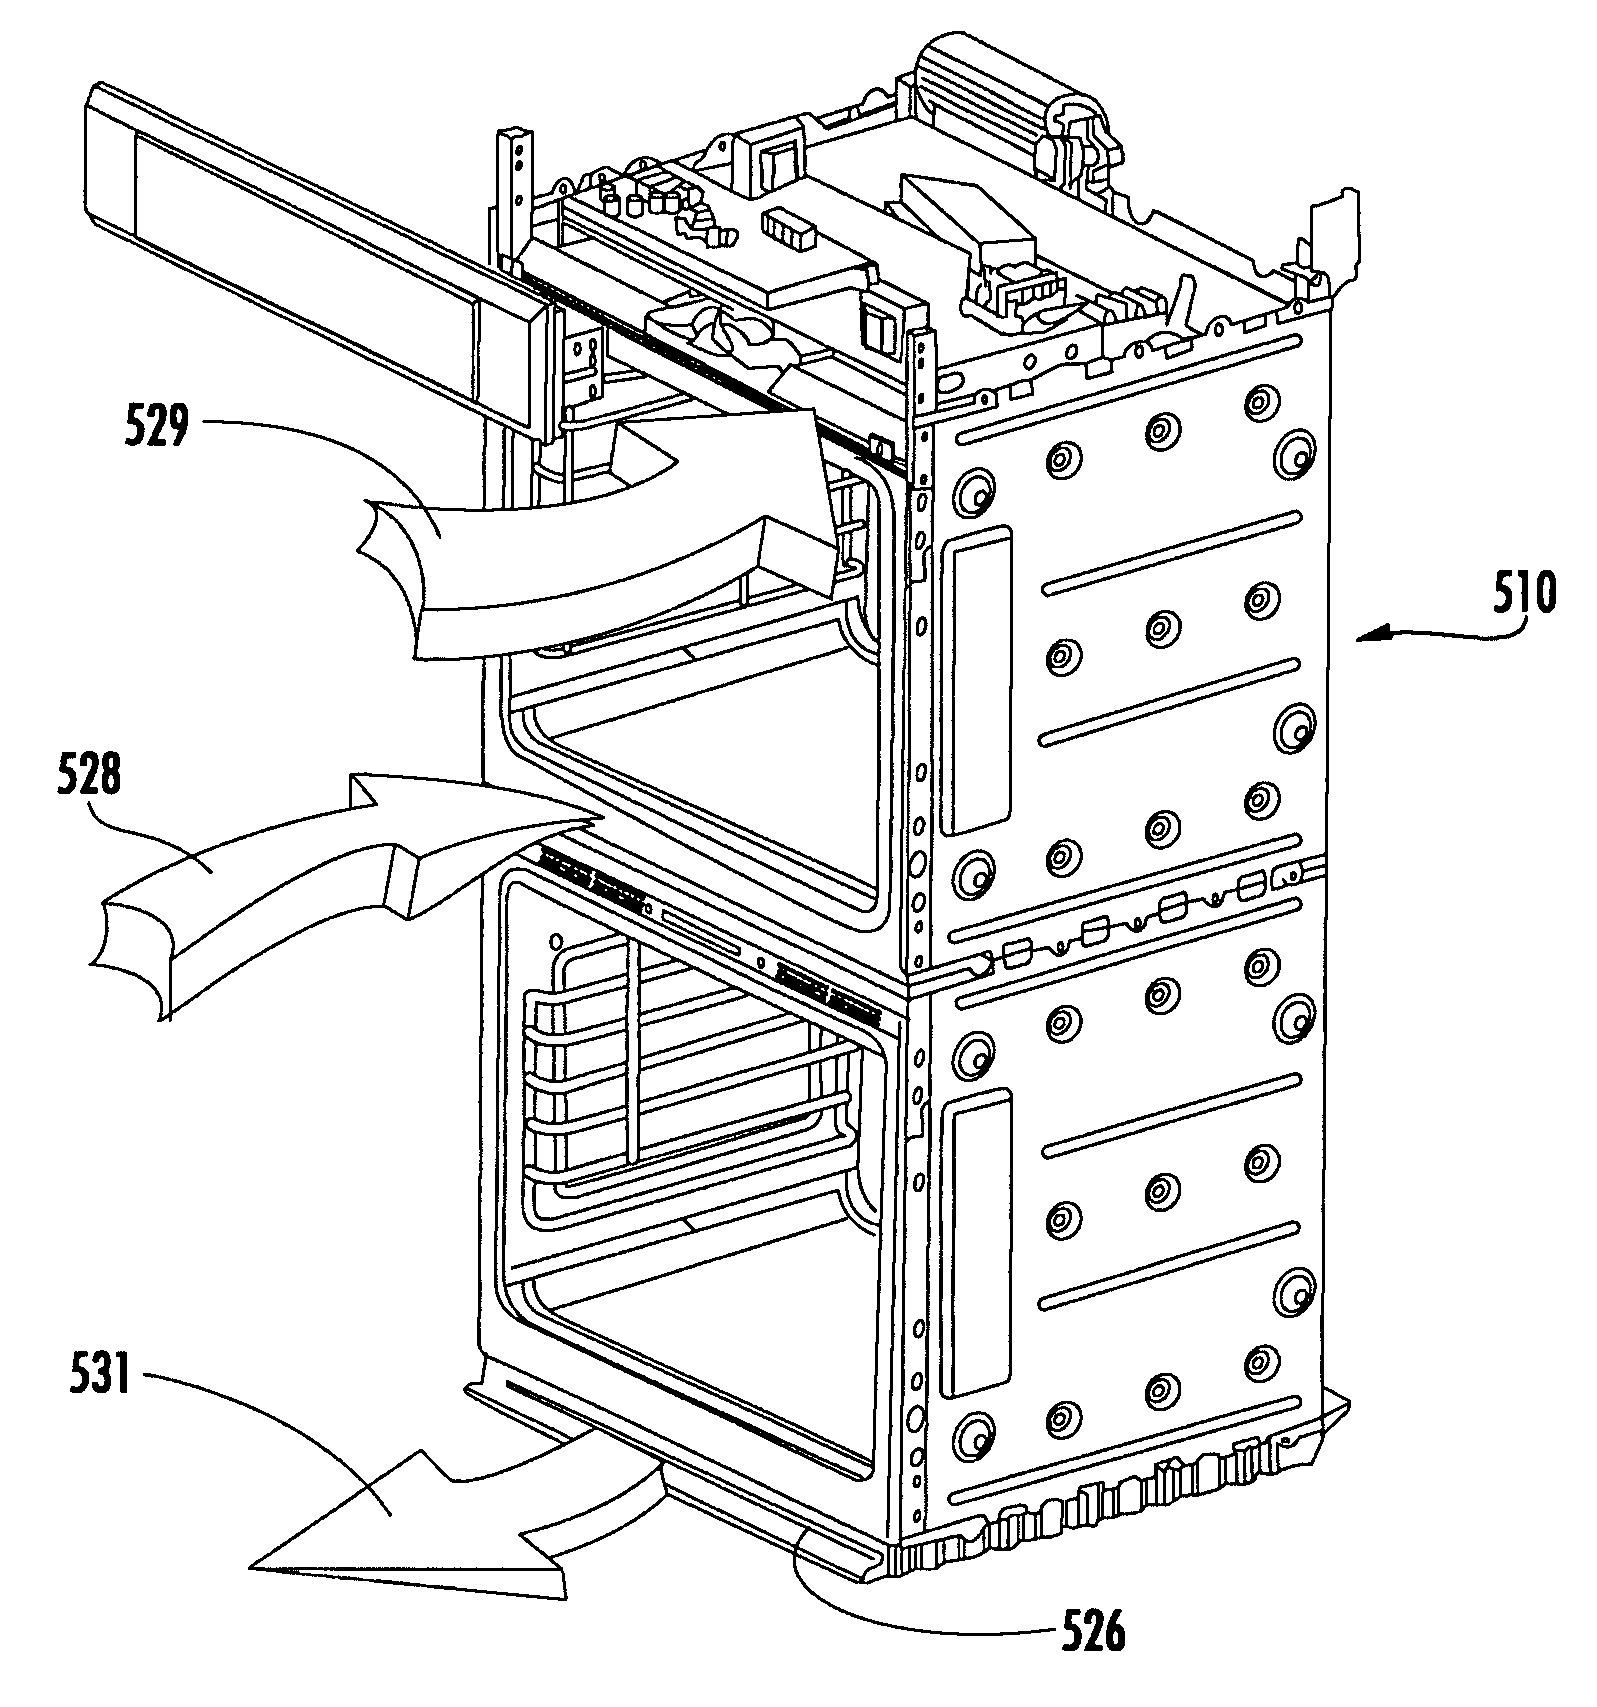 Cooking appliance having a latch plate shield for improved guidance of cooling air and exhaust air